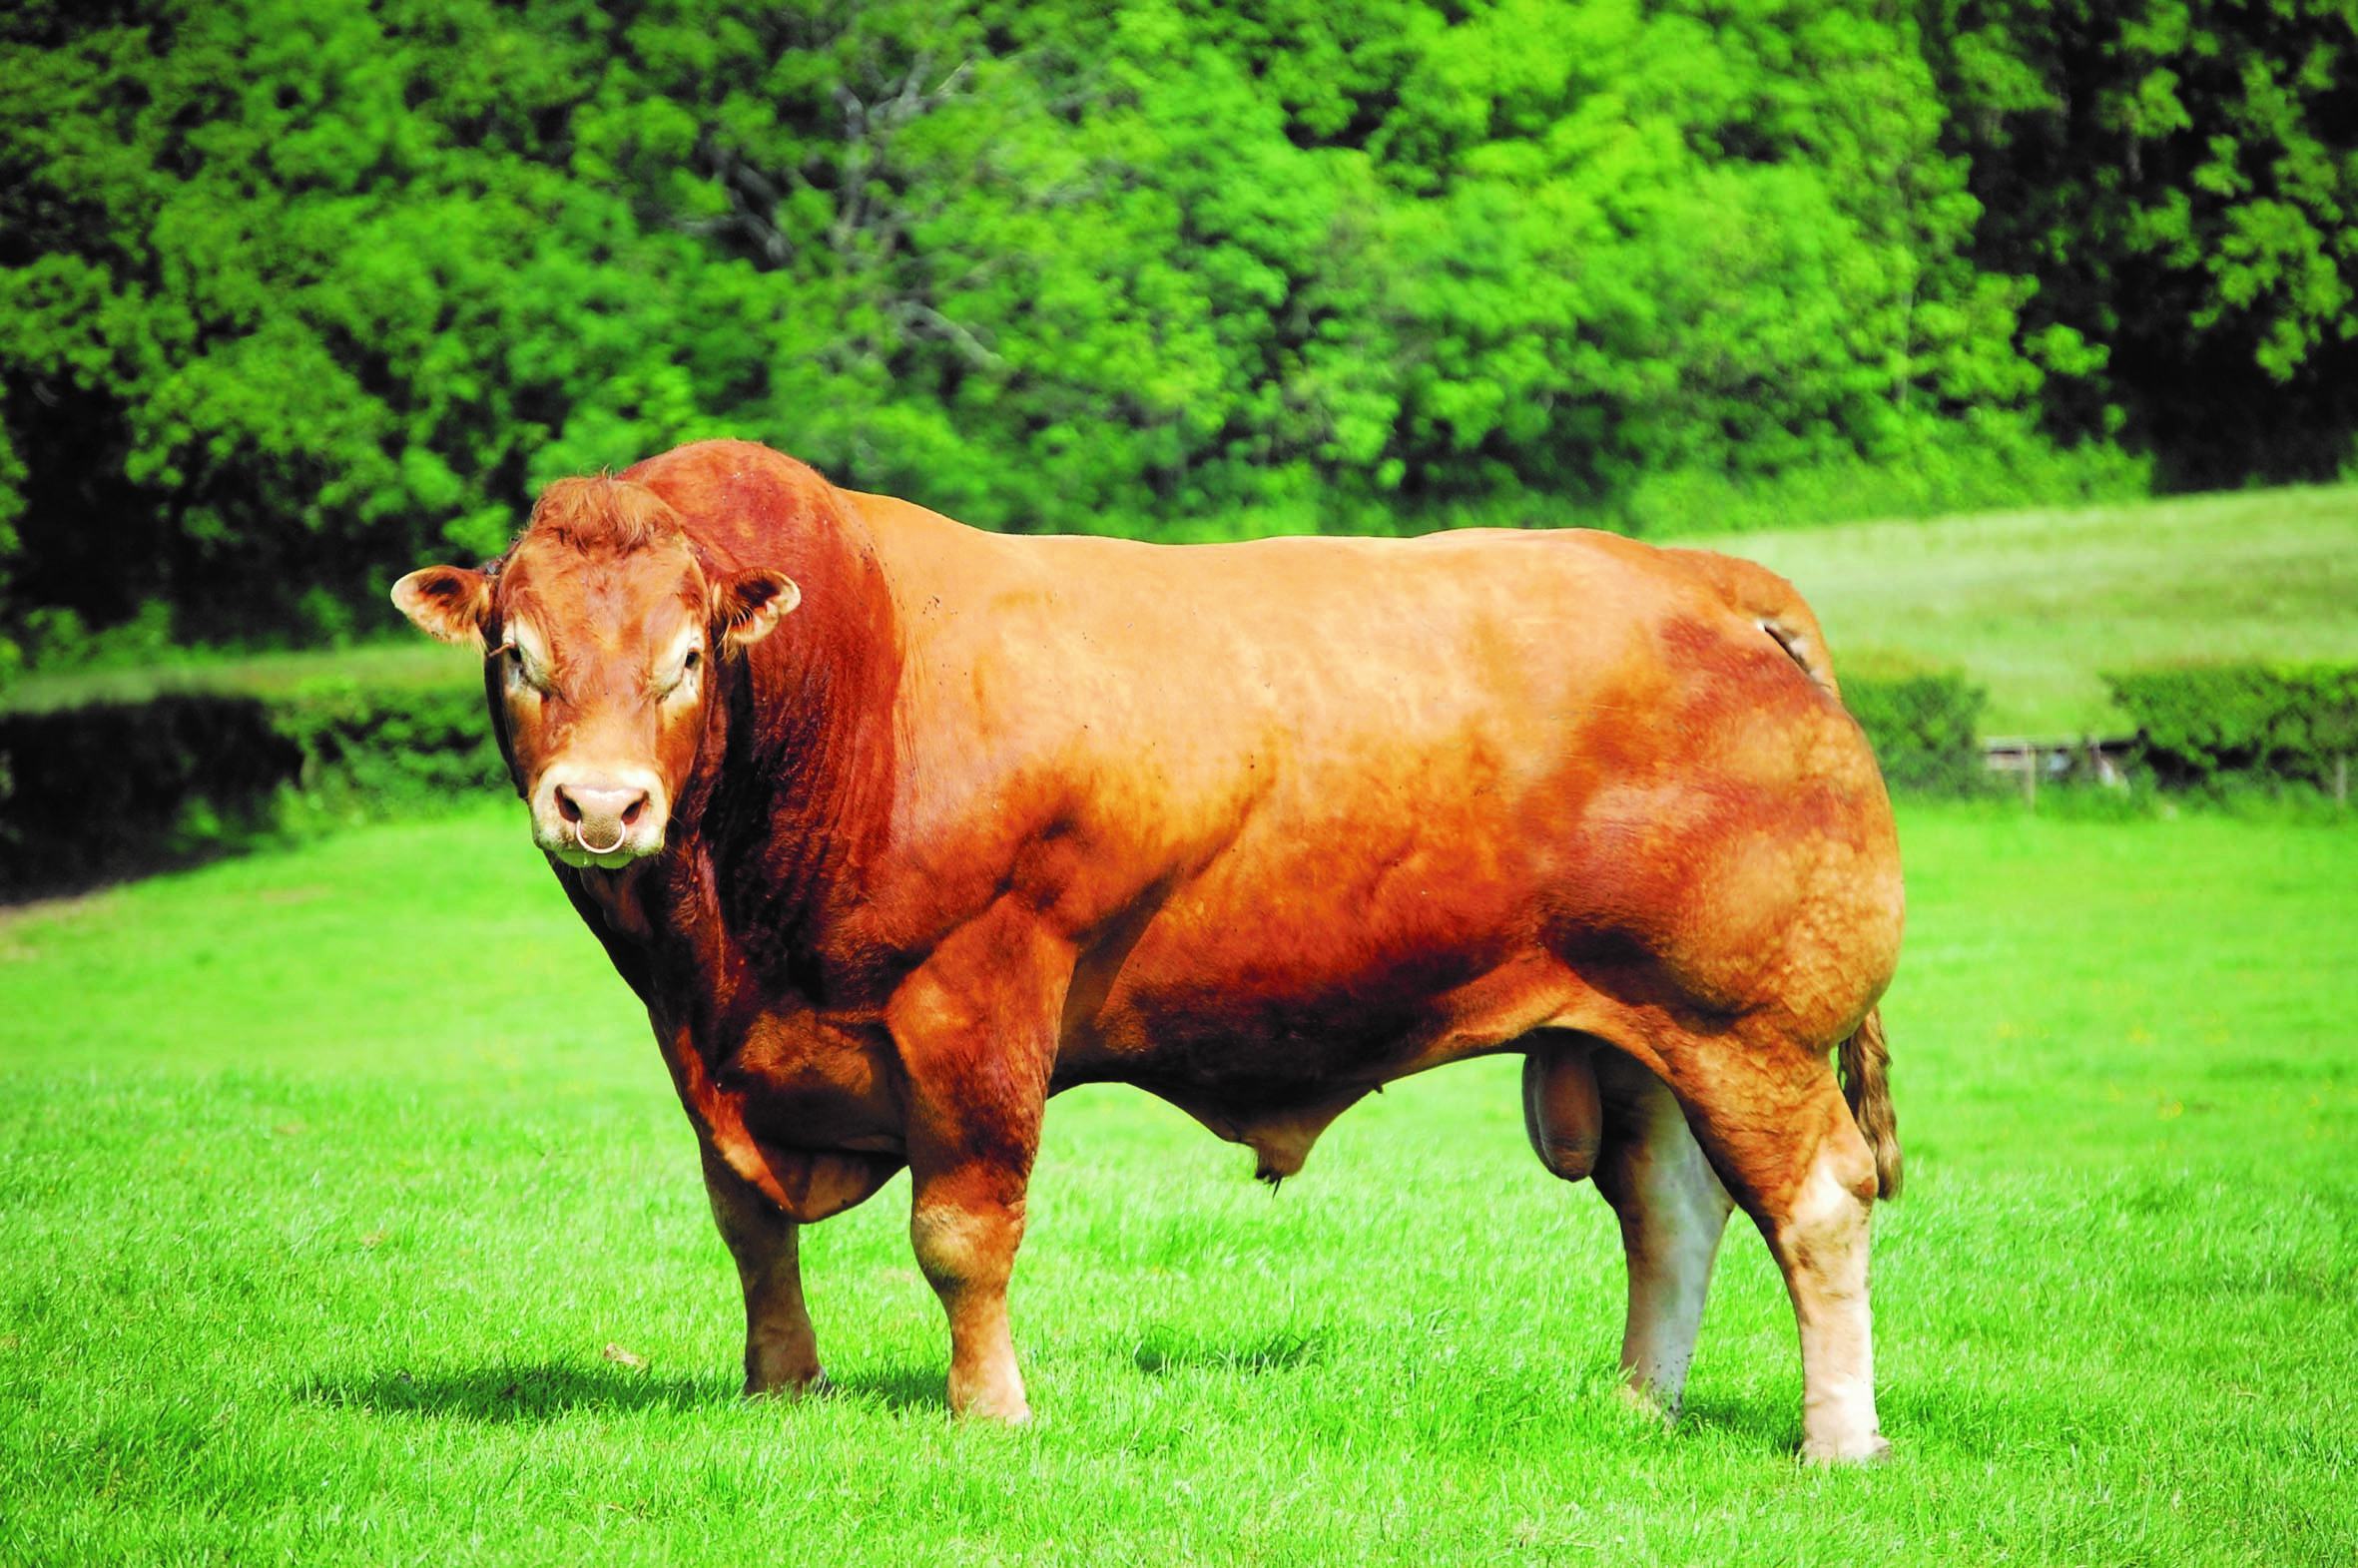 a brown cow standing on grass